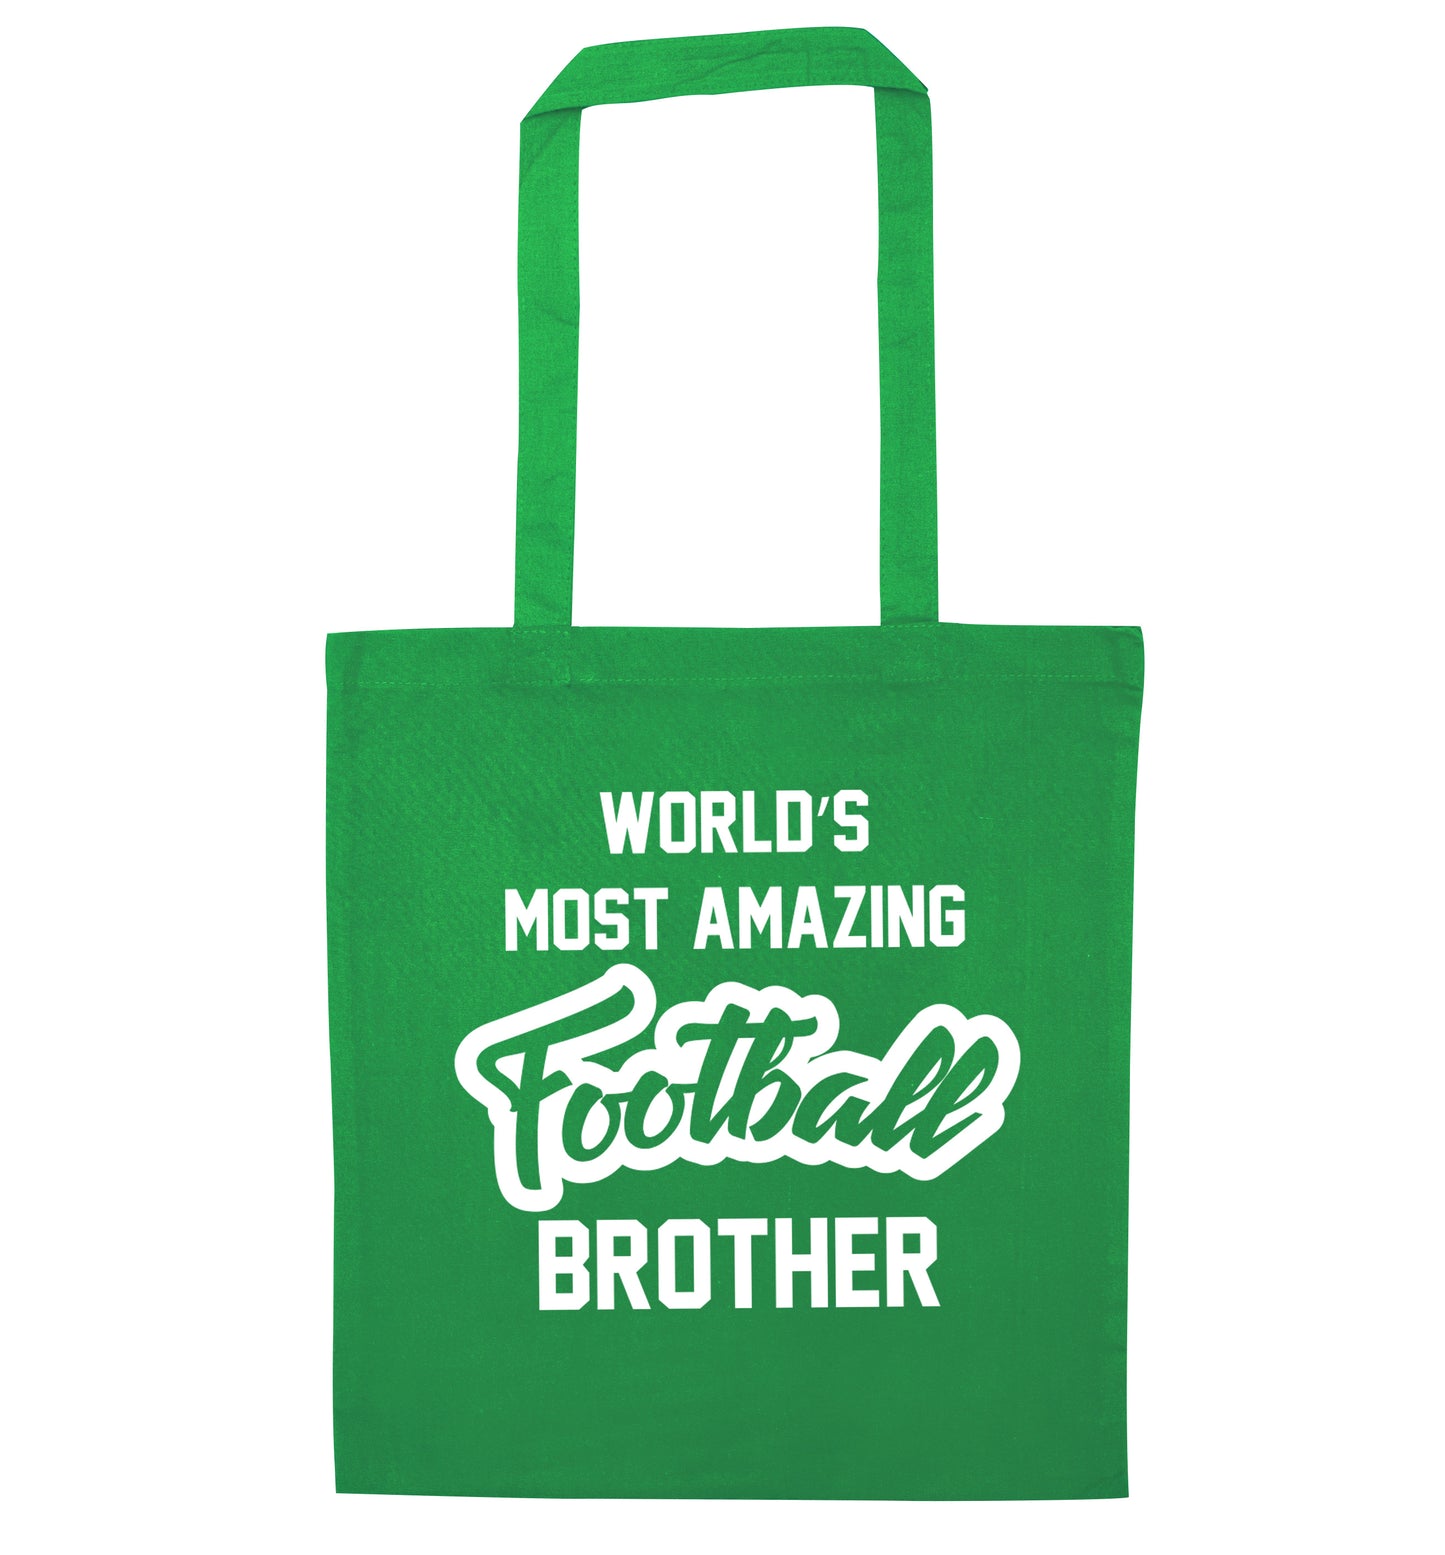 Worlds most amazing football brother green tote bag